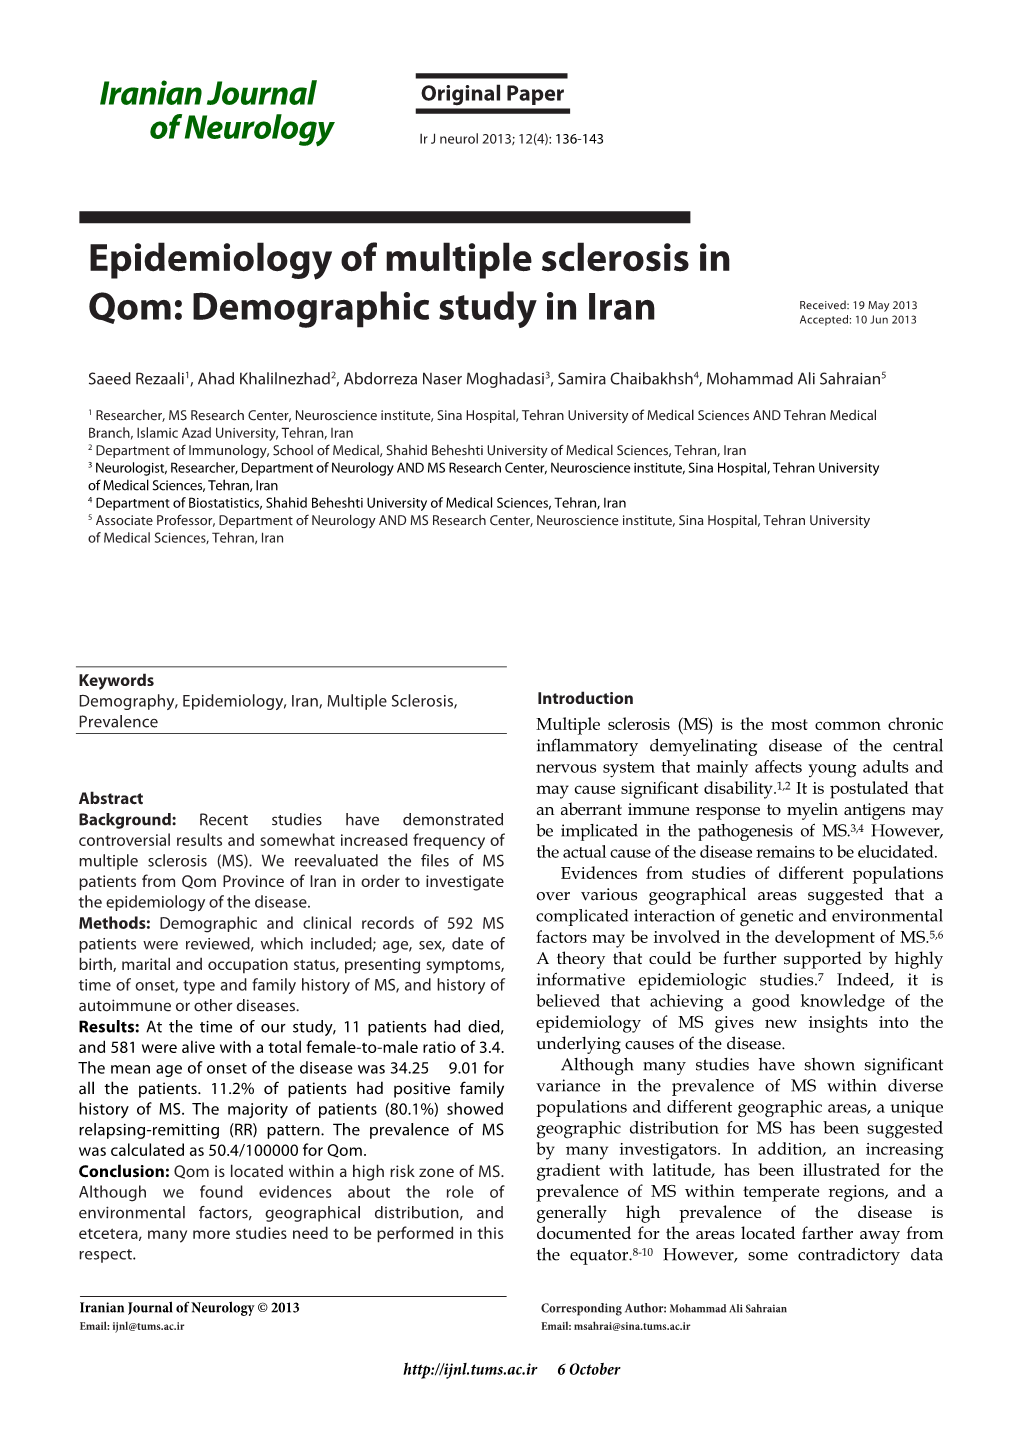 Epidemiology of Multiple Sclerosis in Qom: Demographic Study in Iran